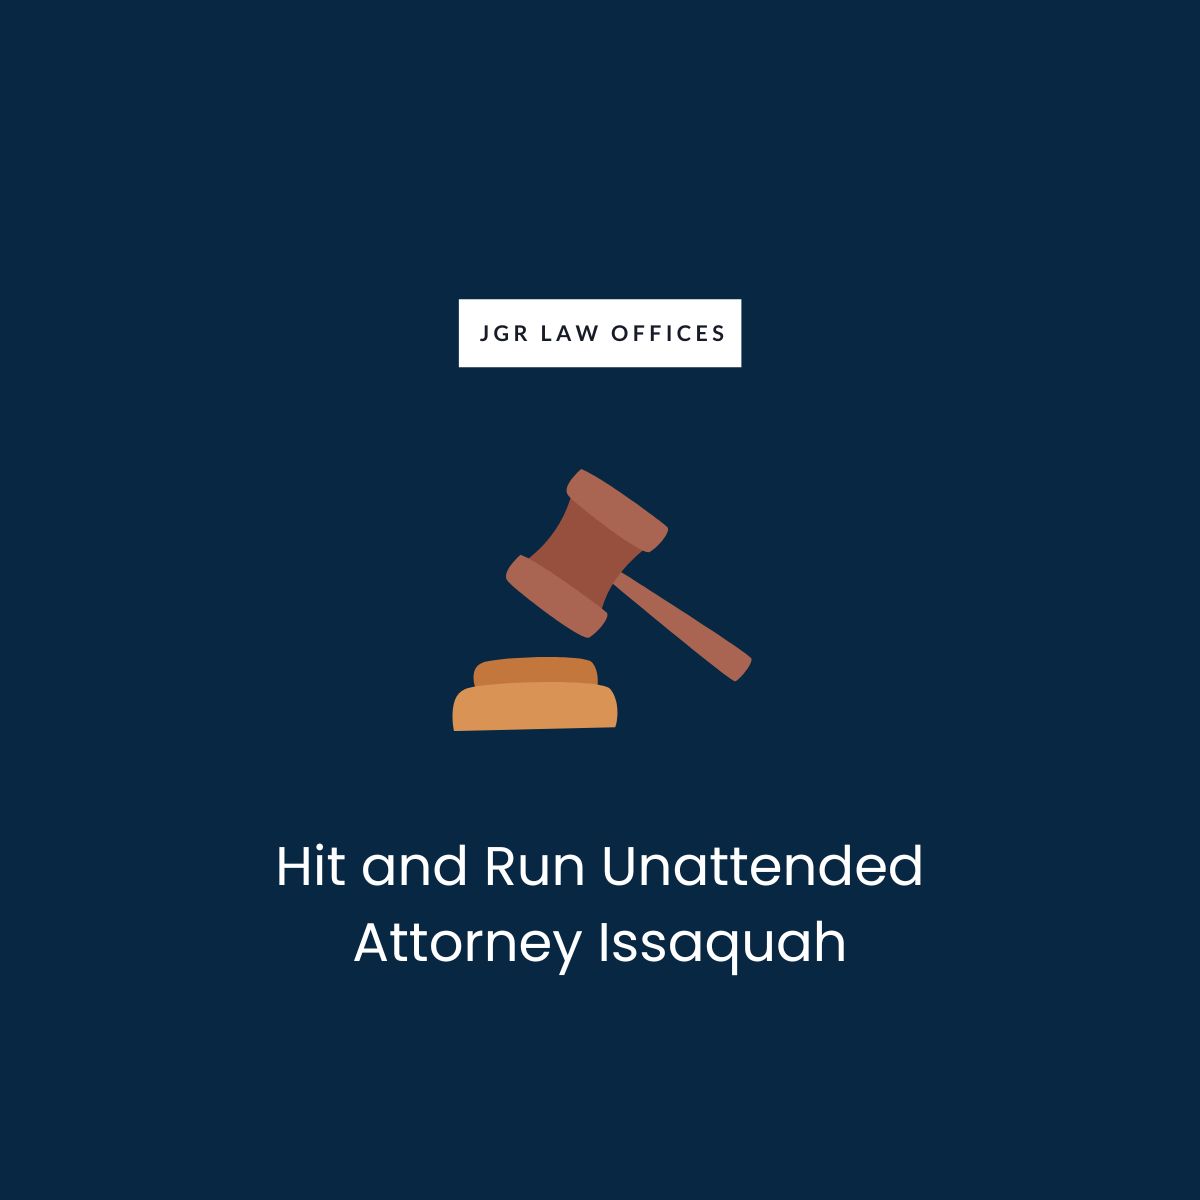 Hit and Run Unattended Lawyer Issaquah Hit and Run Unattended Hit and Run Unattended